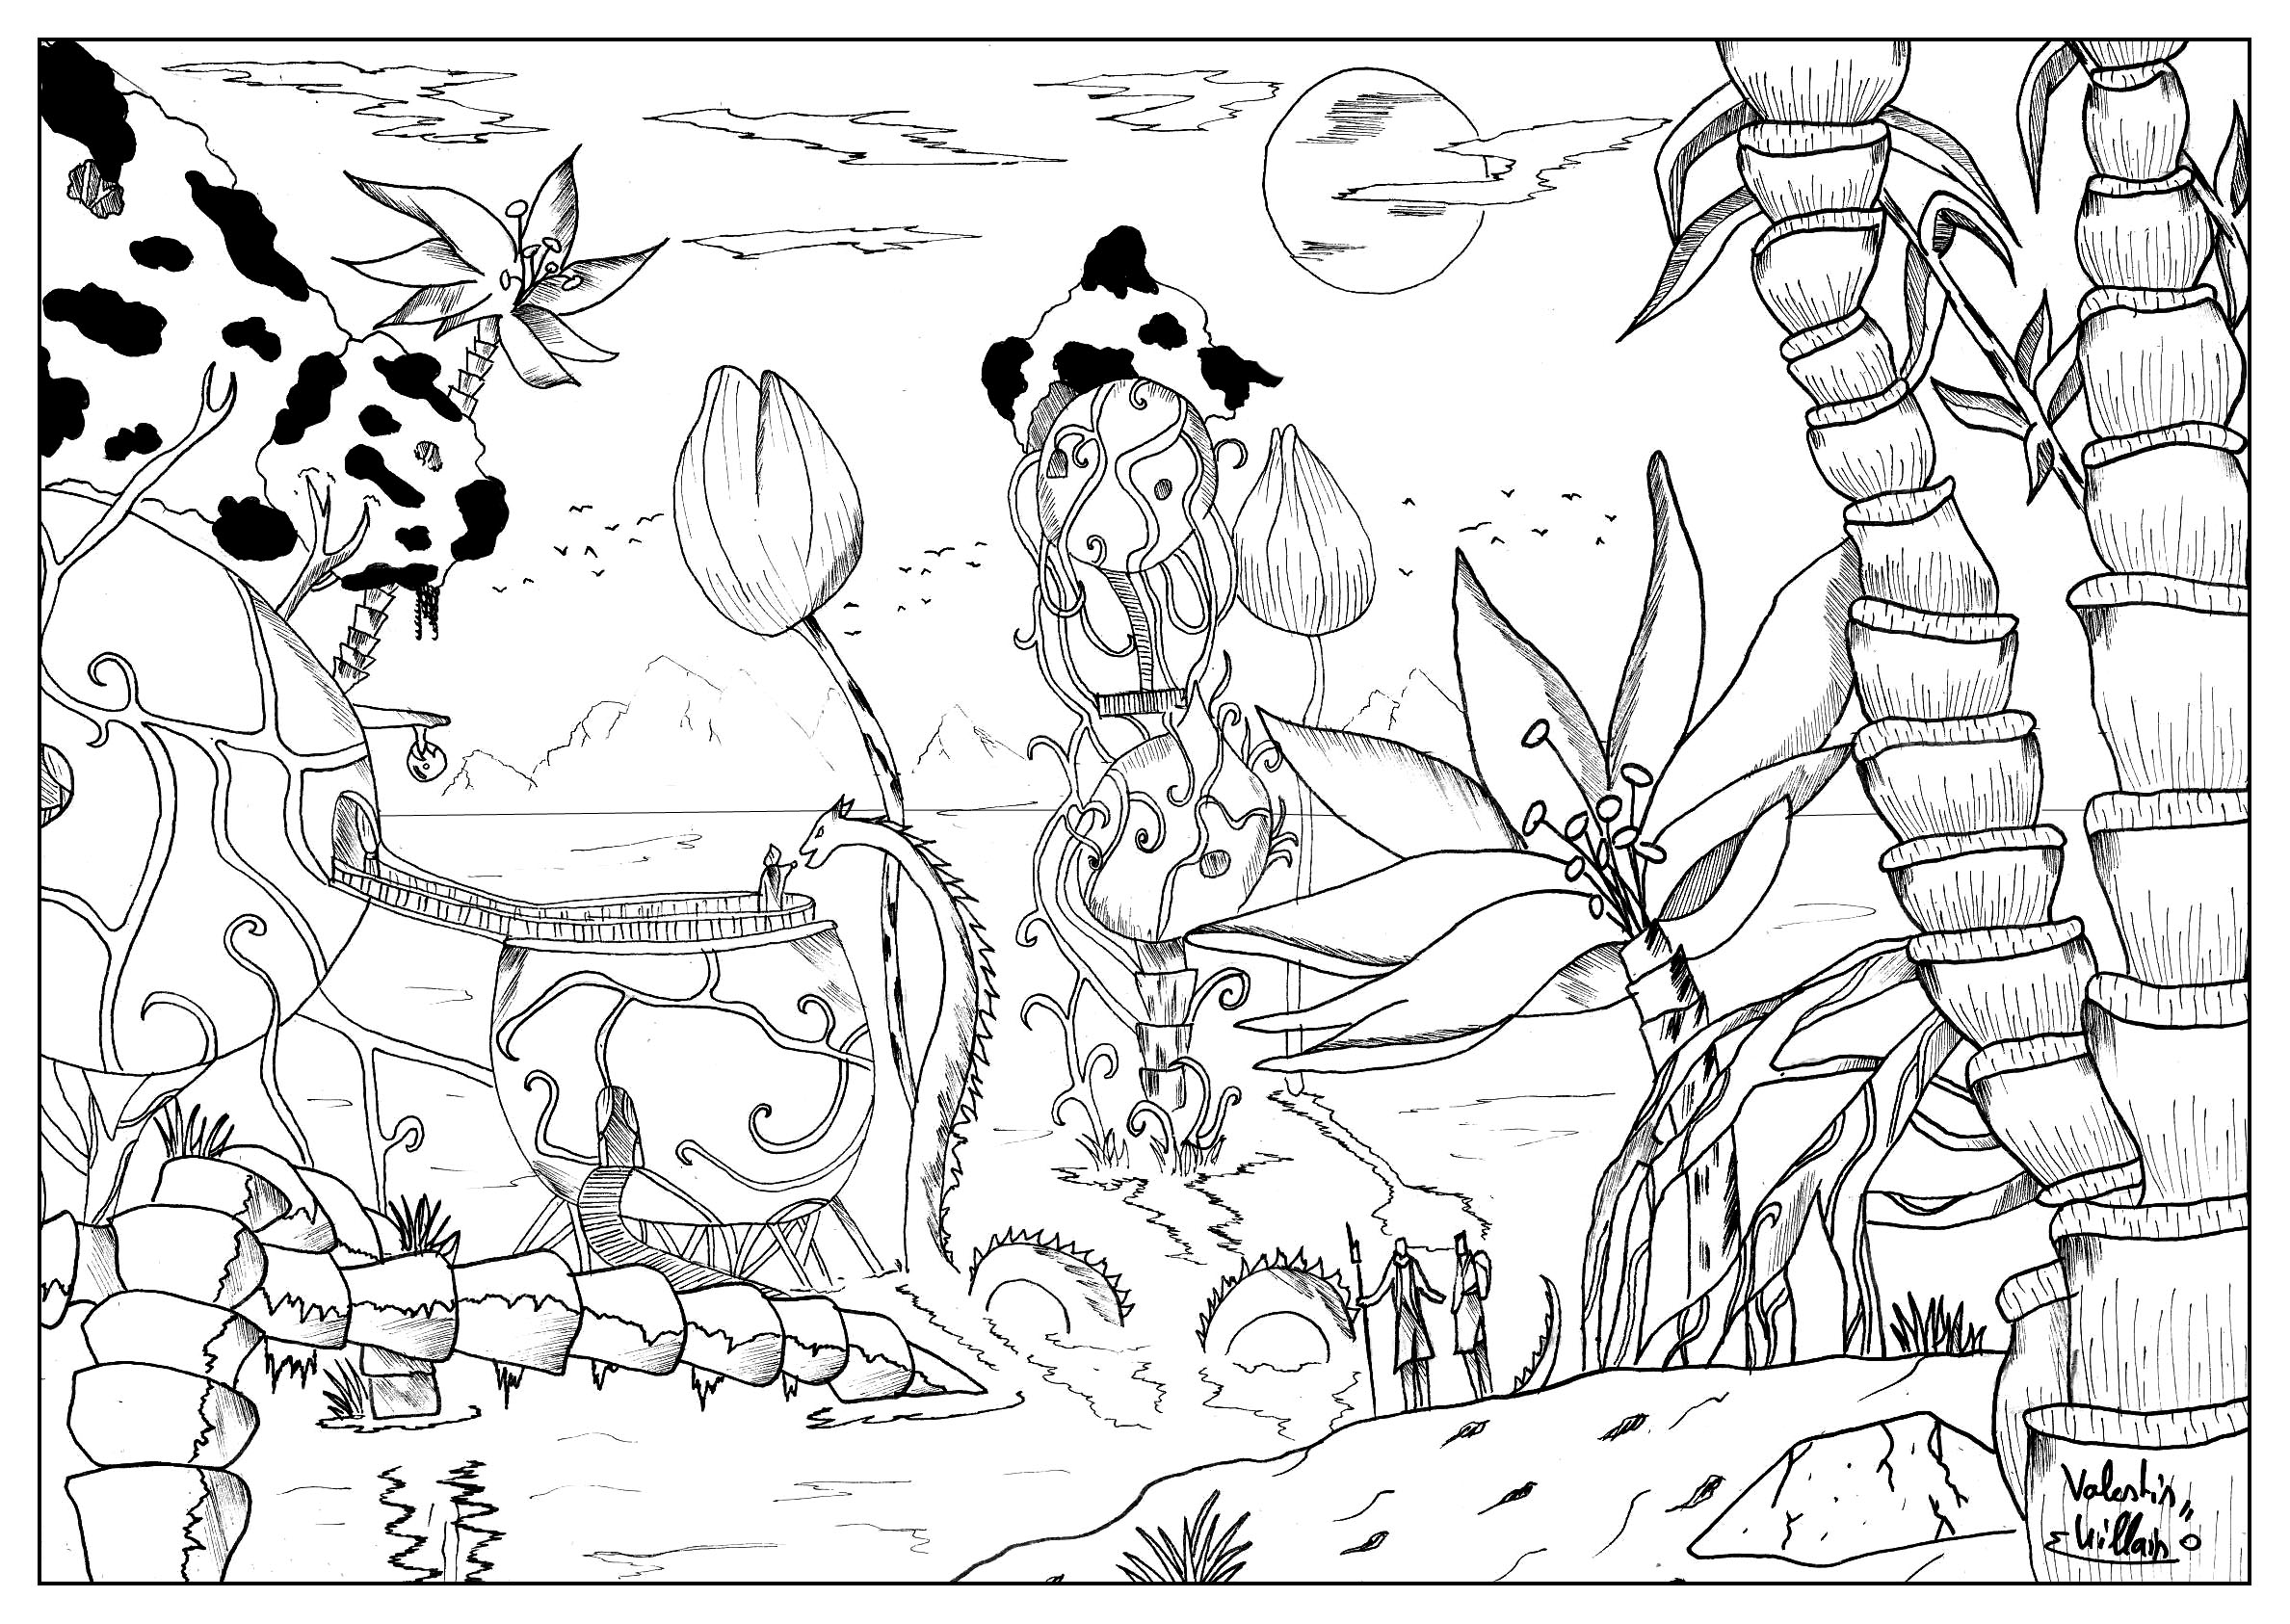 Coloring page of an imaginary aquatic village with a strange creature and a mysterious character